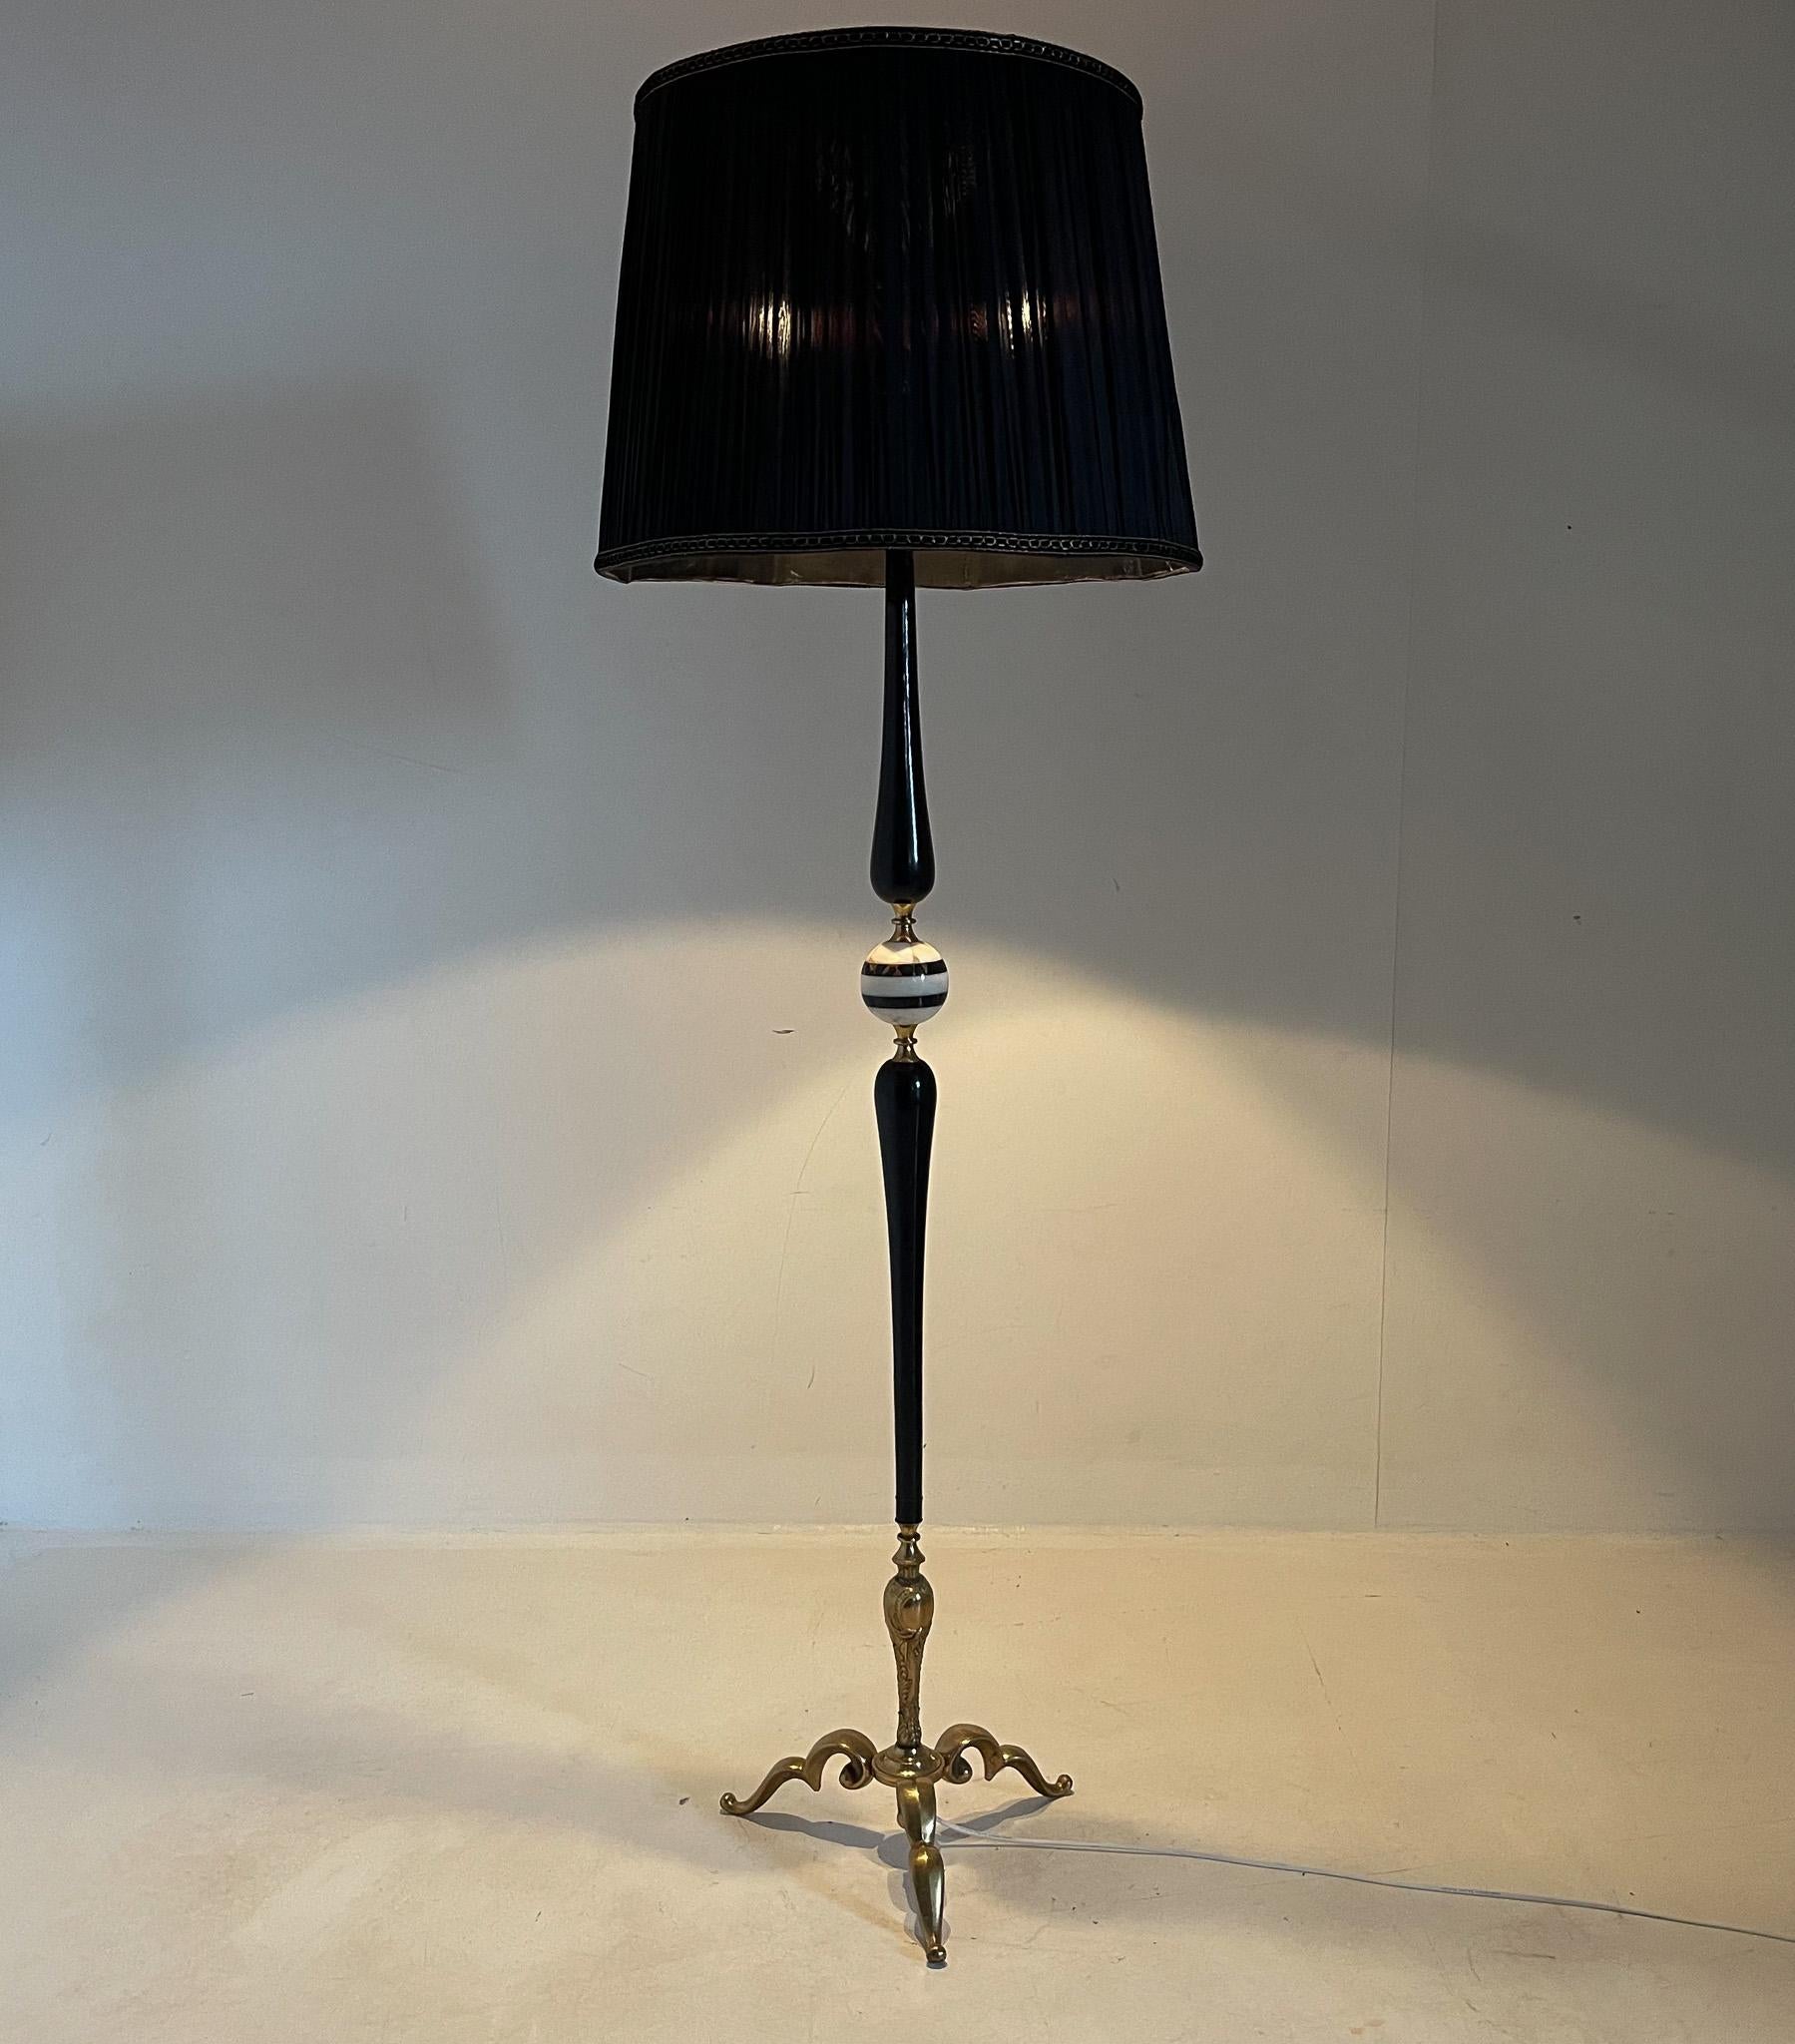 Stunning vintage floor lamp made of ebonized wood, onyx and brass with black fabric lamp shade. Produced in Italy in the 1950's. Bulbs: 3 x E25-E27.